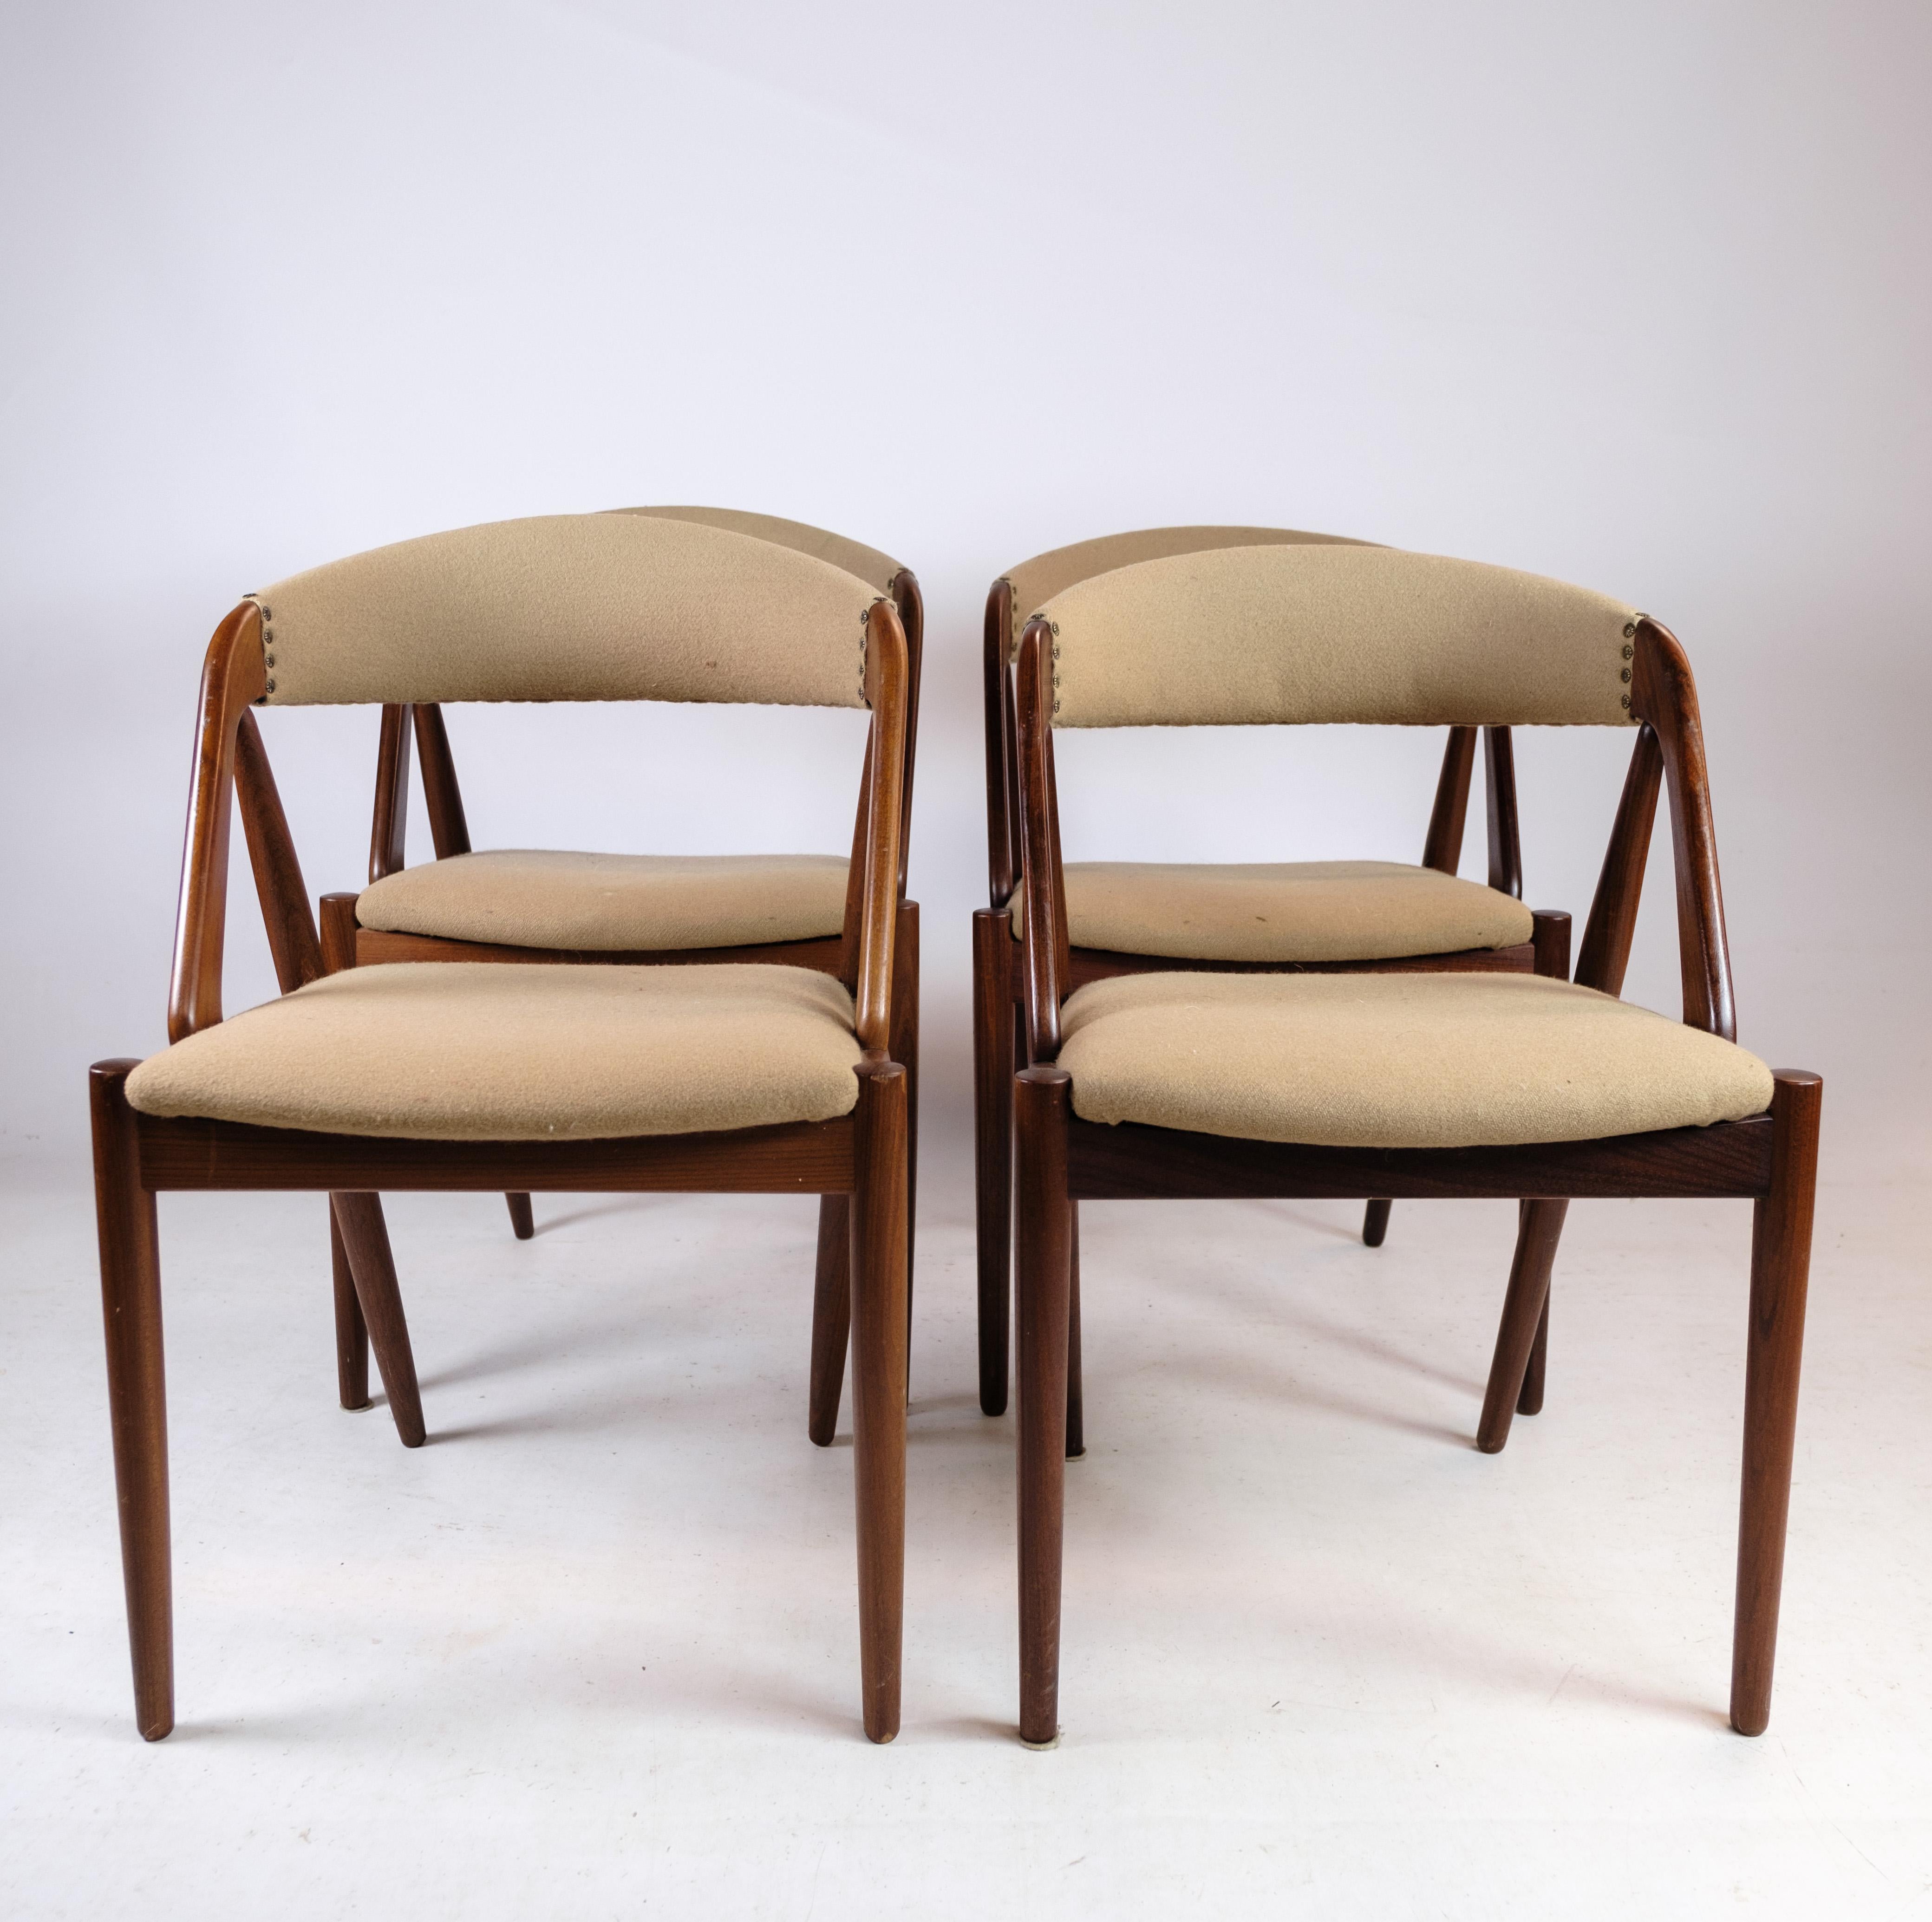 Mid-Century Modern 4 Dining Room Chairs Model 31 Made In Teak, Designed By Kai Kristiansen For Sale